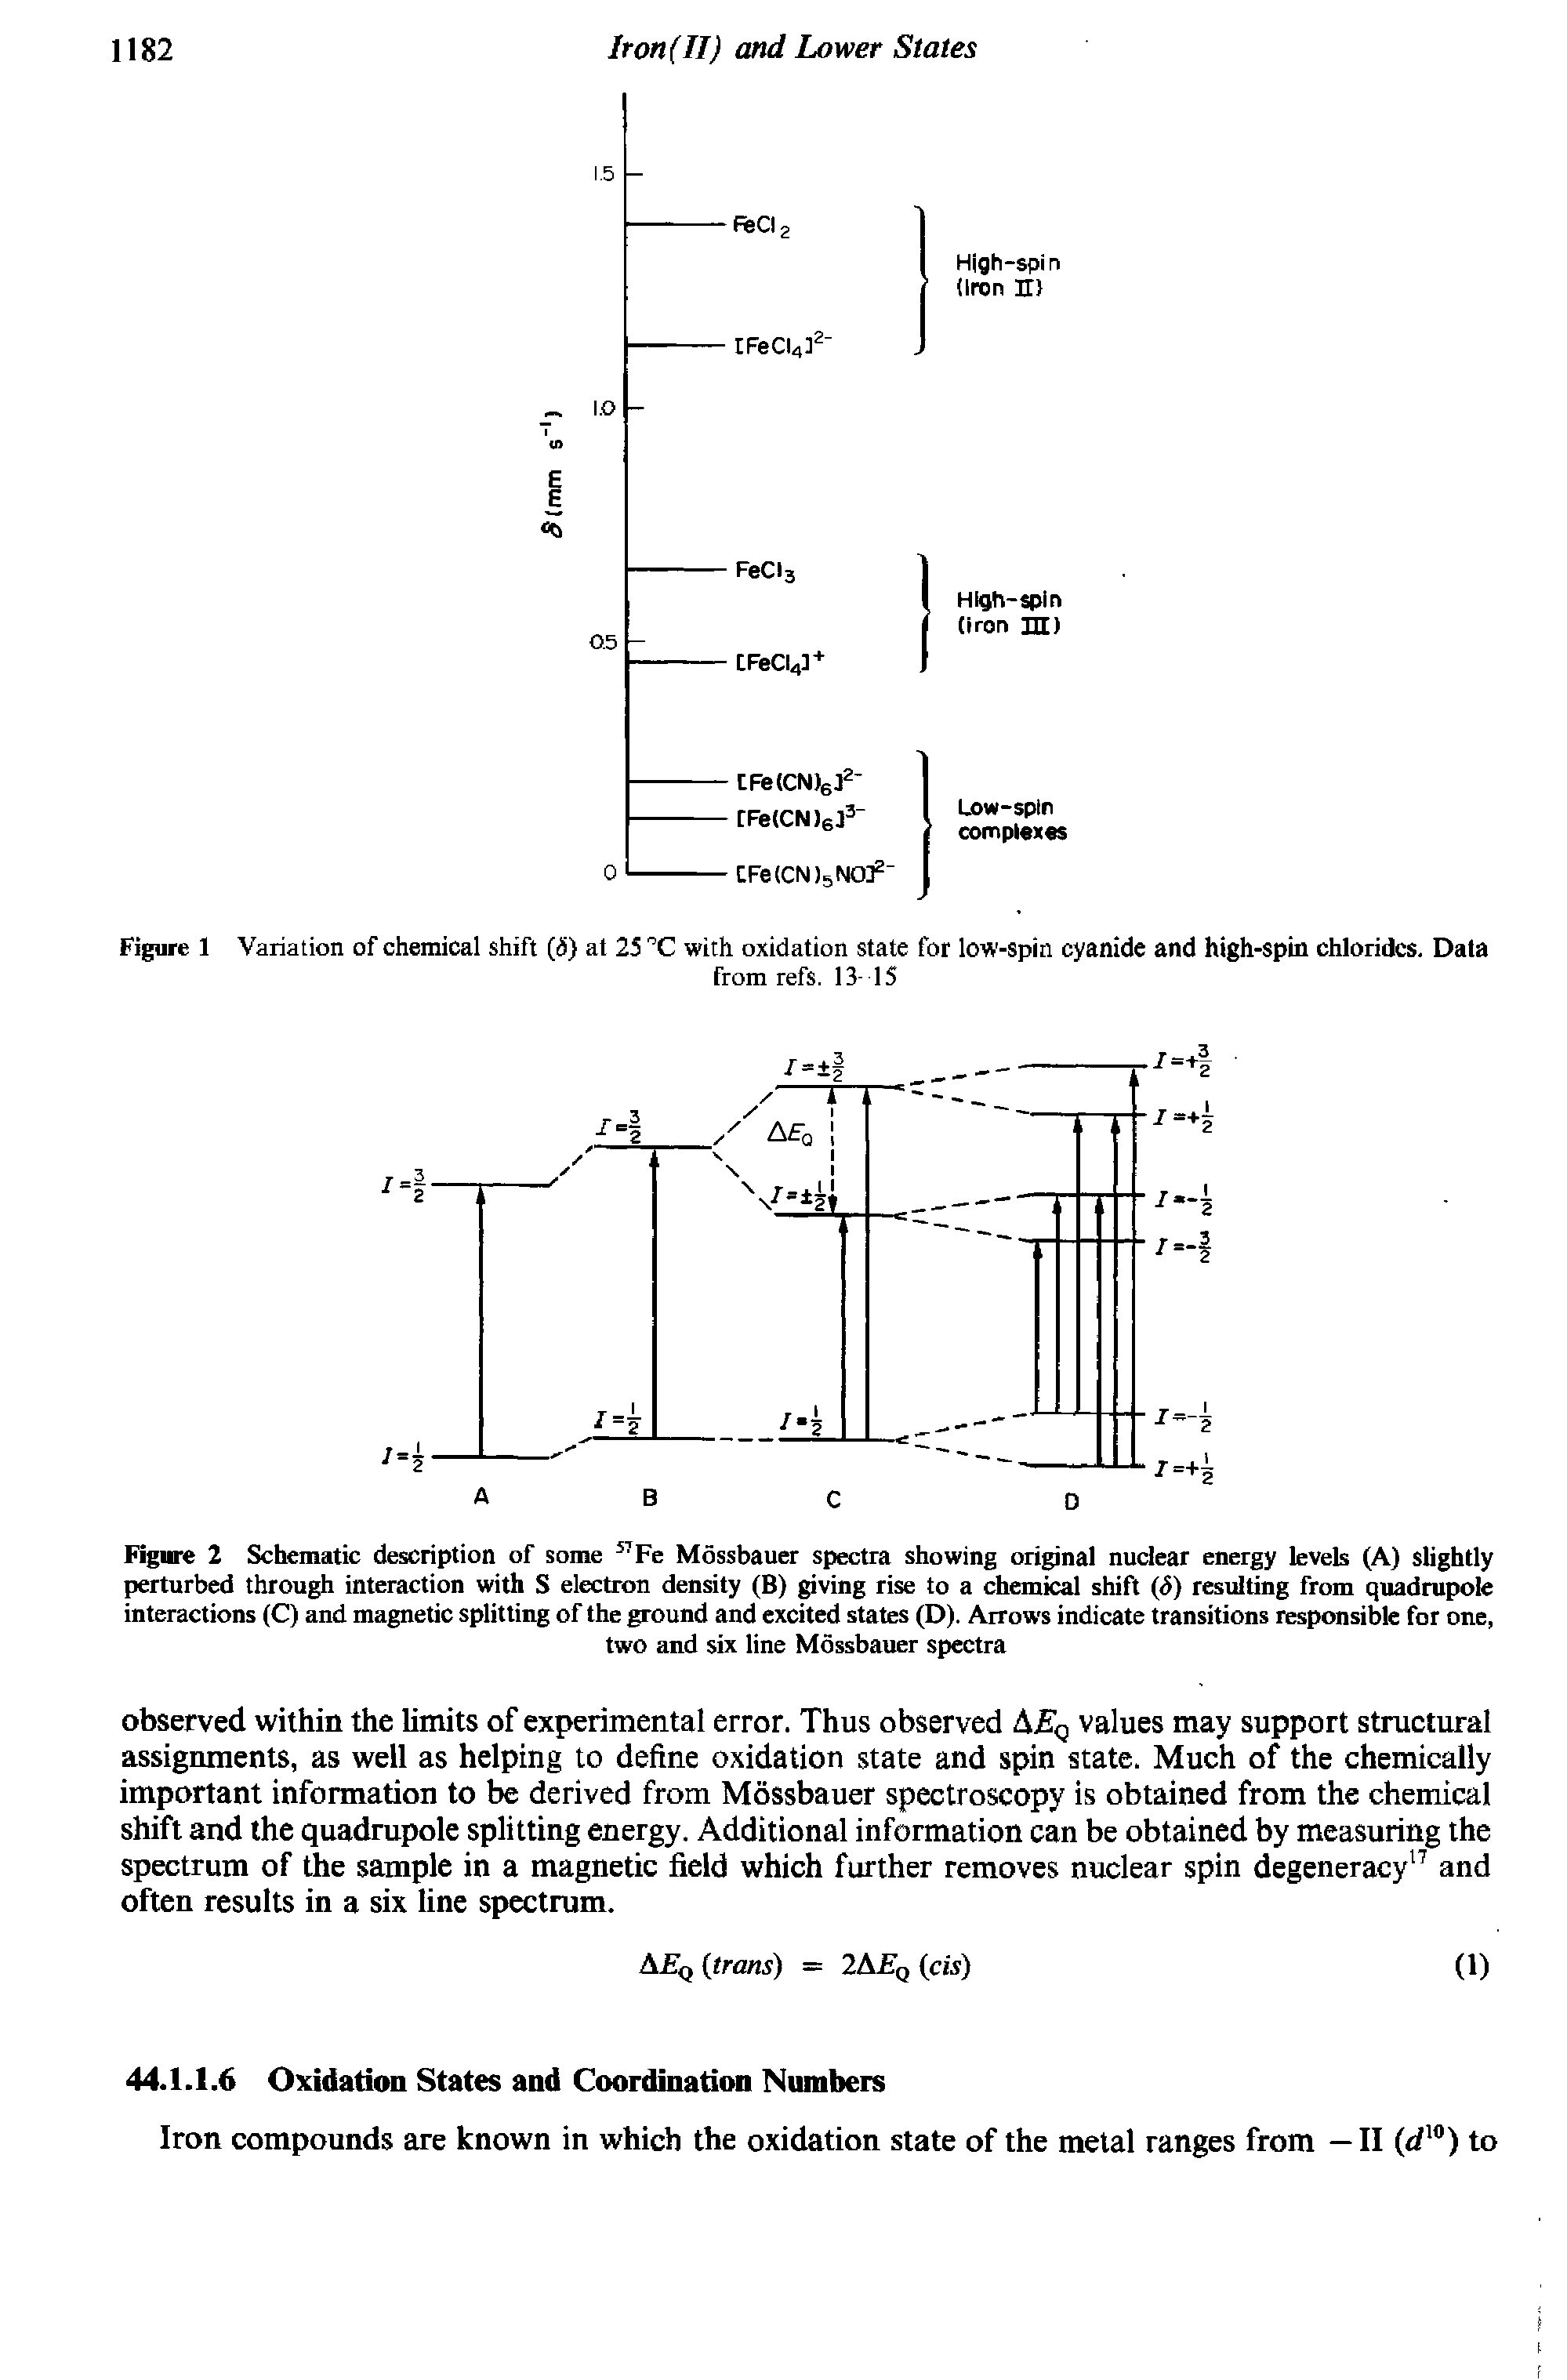 Figure 2 Schematic description of some 57 Fe Mossbauer spectra showing original nuclear energy levels (A) slightly perturbed through interaction with S electron density (B) giving rise to a chemical shift (8) resulting from quadrupole interactions (C) and magnetic splitting of the ground and excited states (D). Arrows indicate transitions responsible for one,...